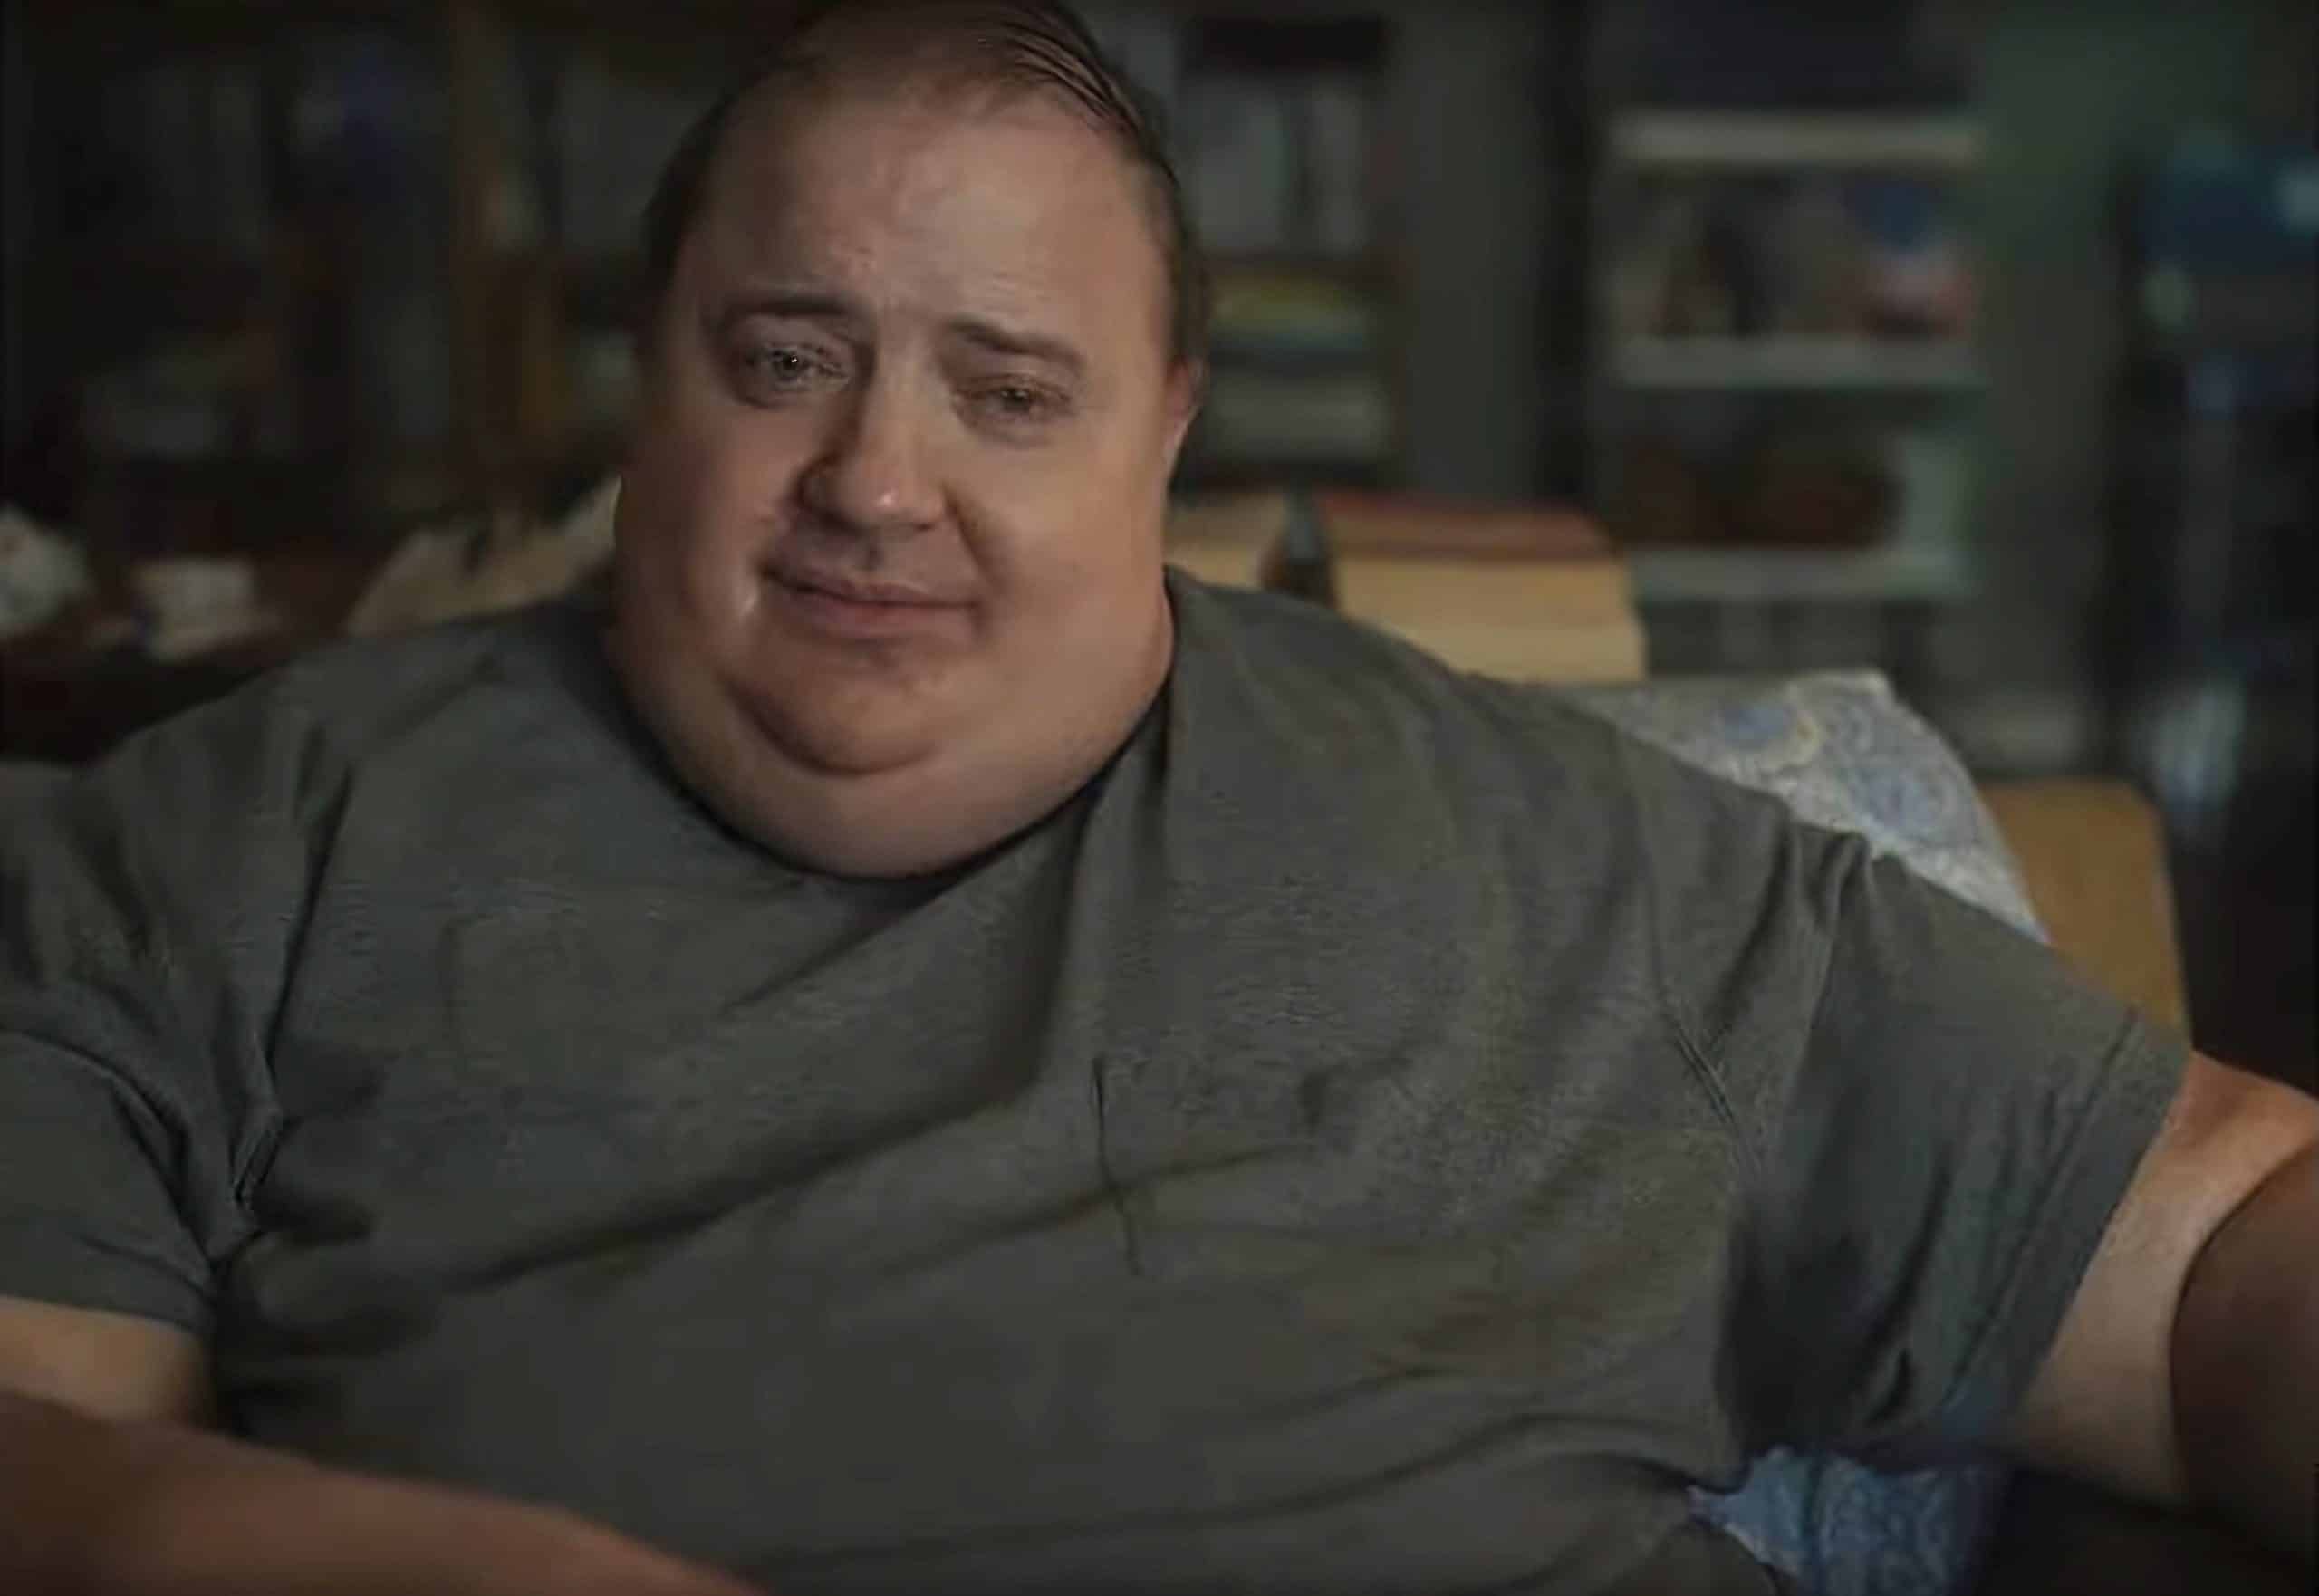 Watch Brendan Fraser As A 600Lb. Man In The Trailer For 'The Whale'